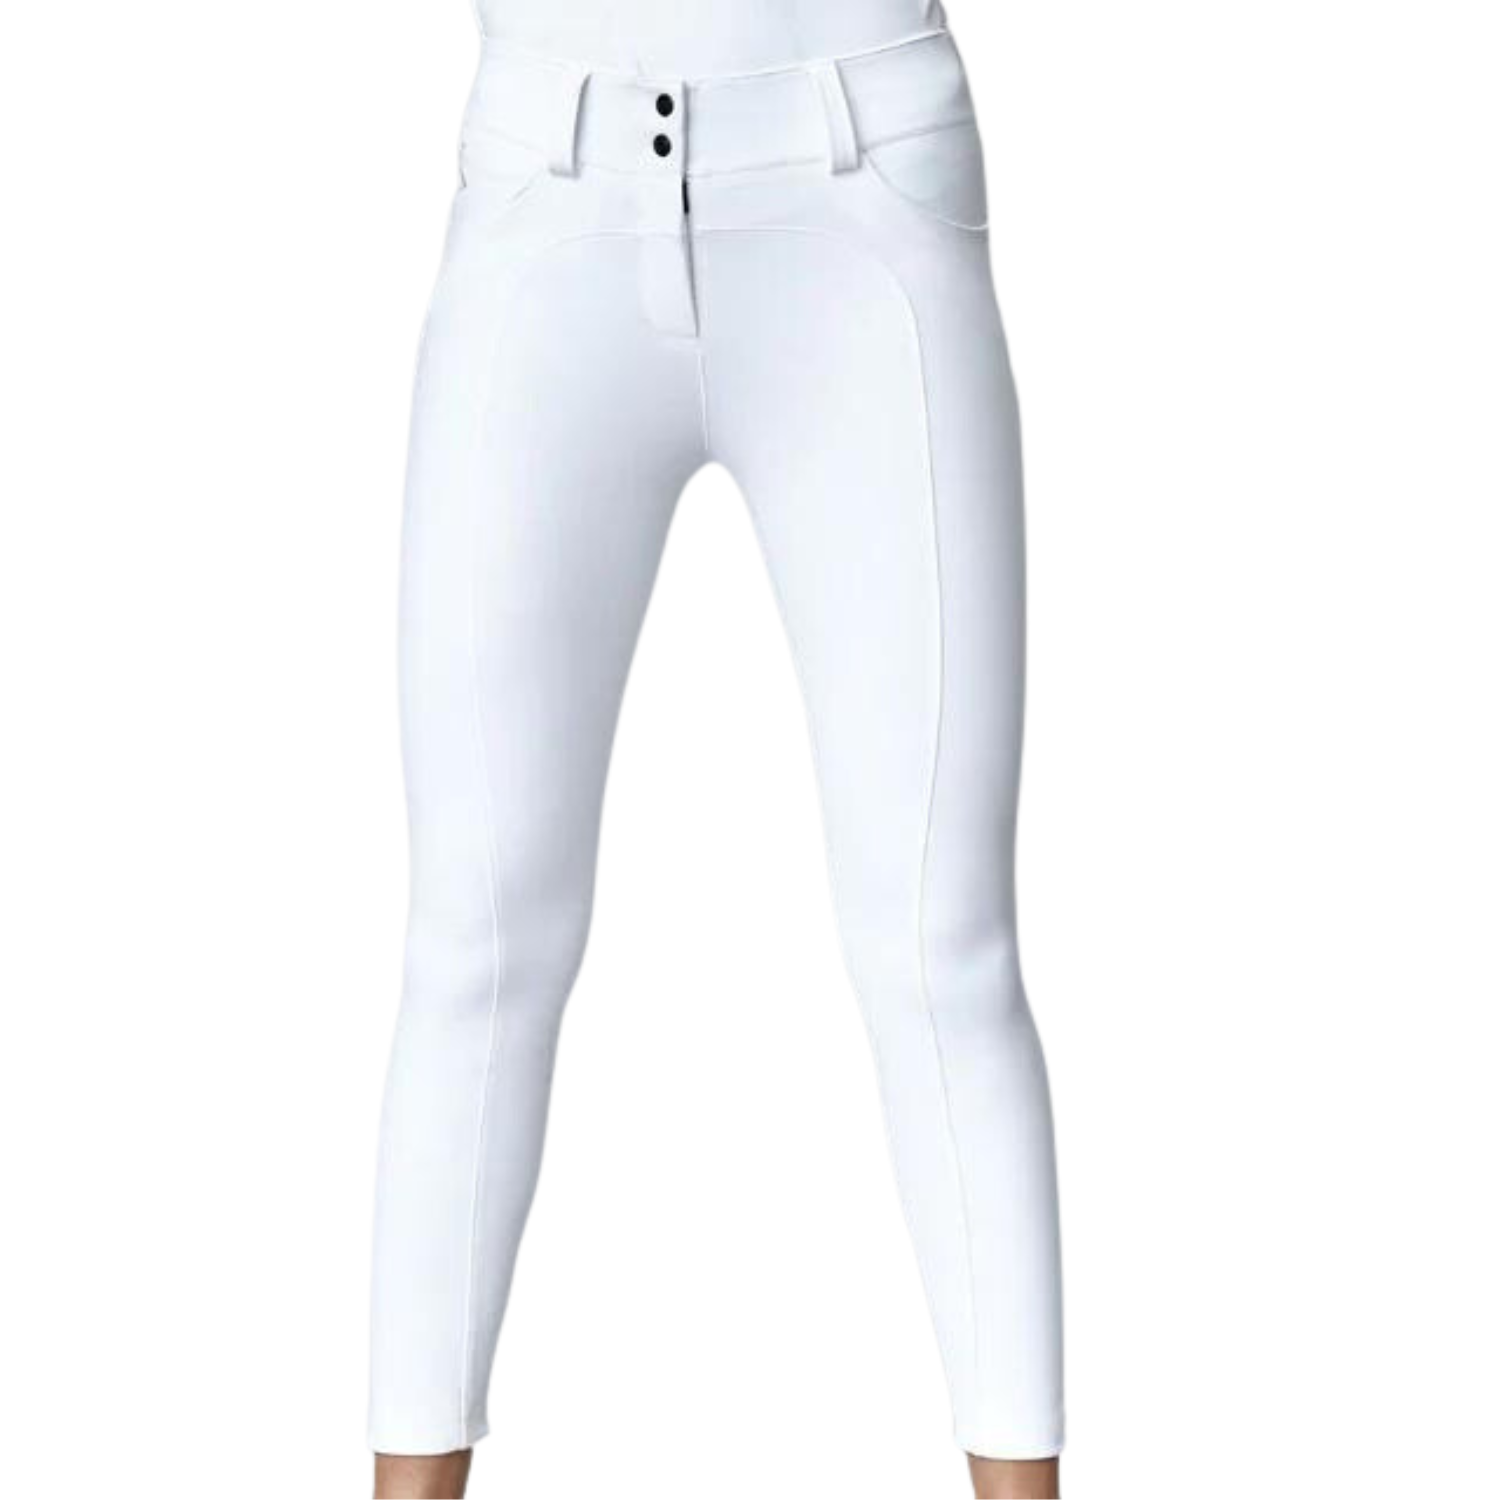 Ladies Compression High Rise Performance Knee Grip Breeches - White